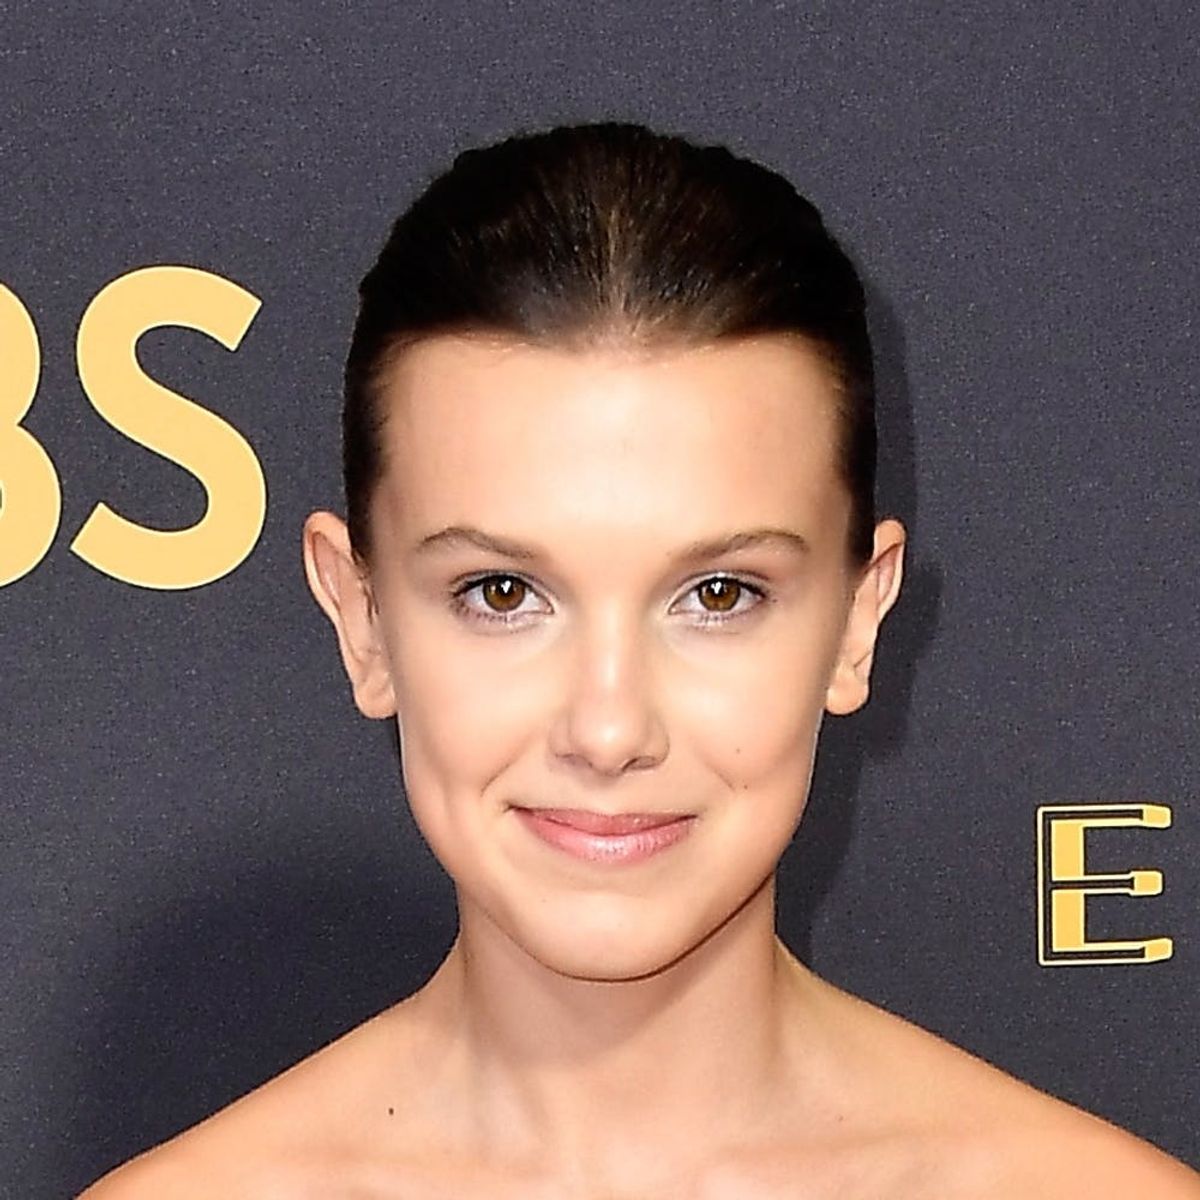 Millie Bobby Brown Just Debuted Long Hair on the Red Carpet and Our Worlds Are “Upside Down”